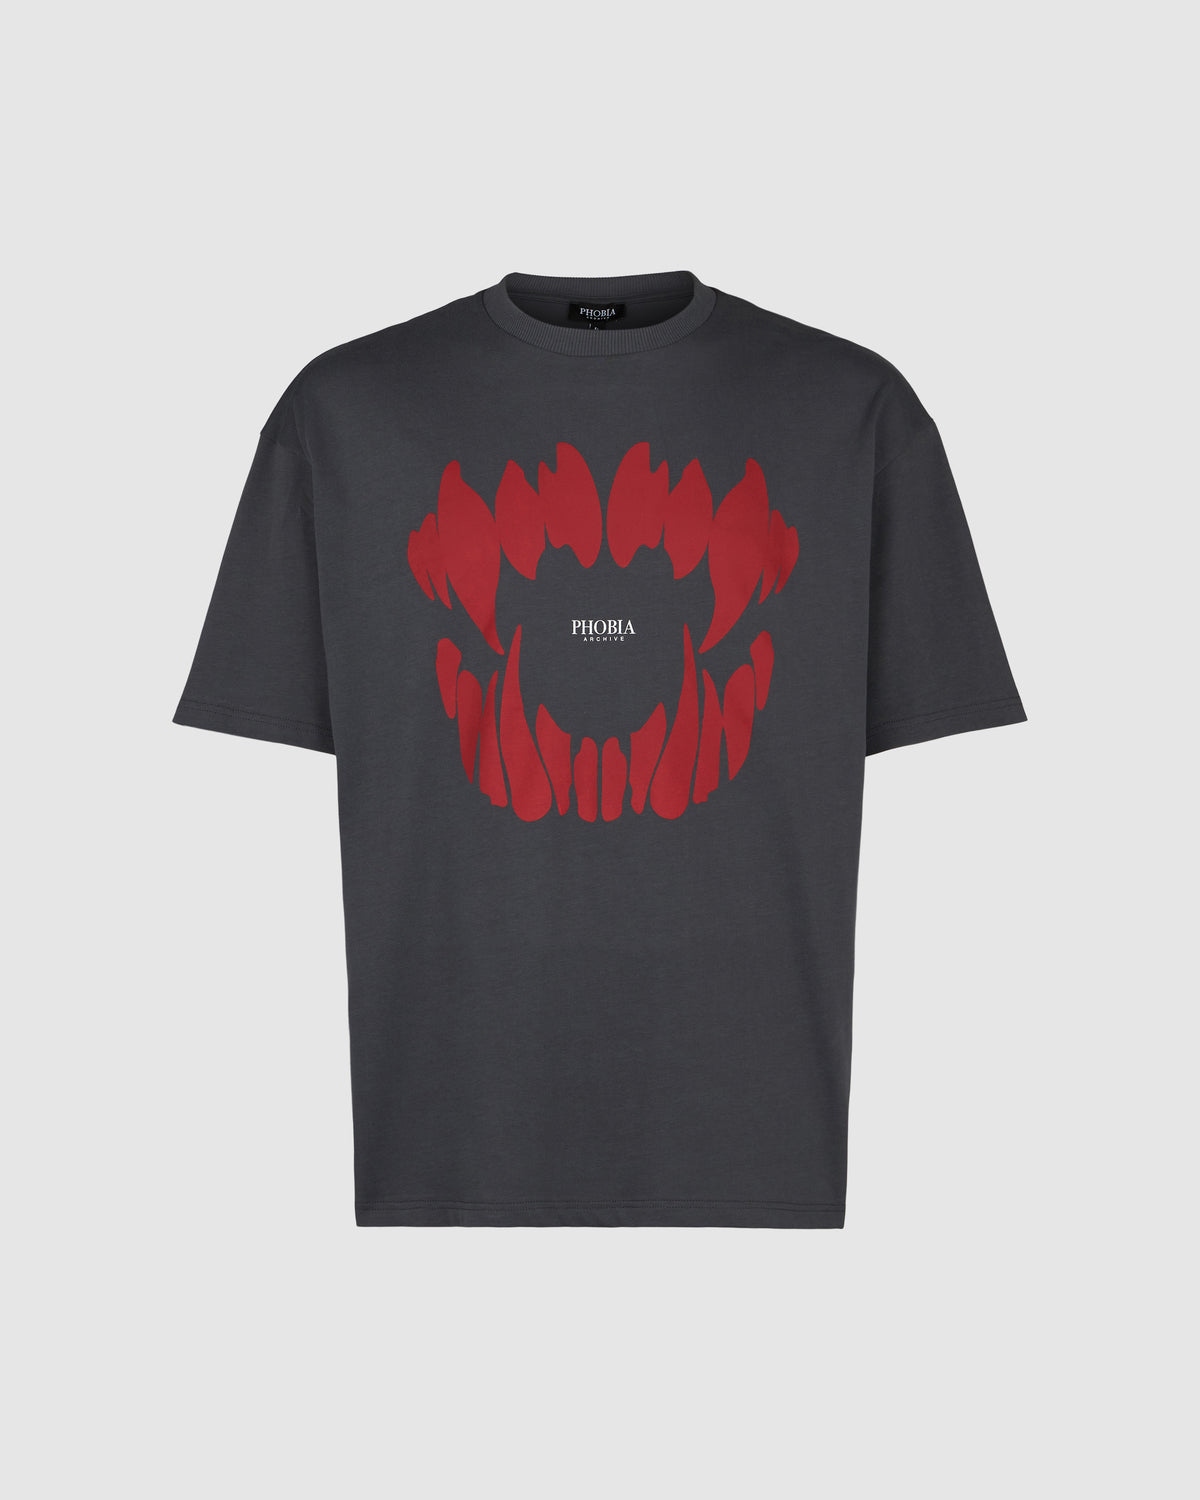 PHOBIA GREY T-SHIRT WITH RED MOUTH PRINT4